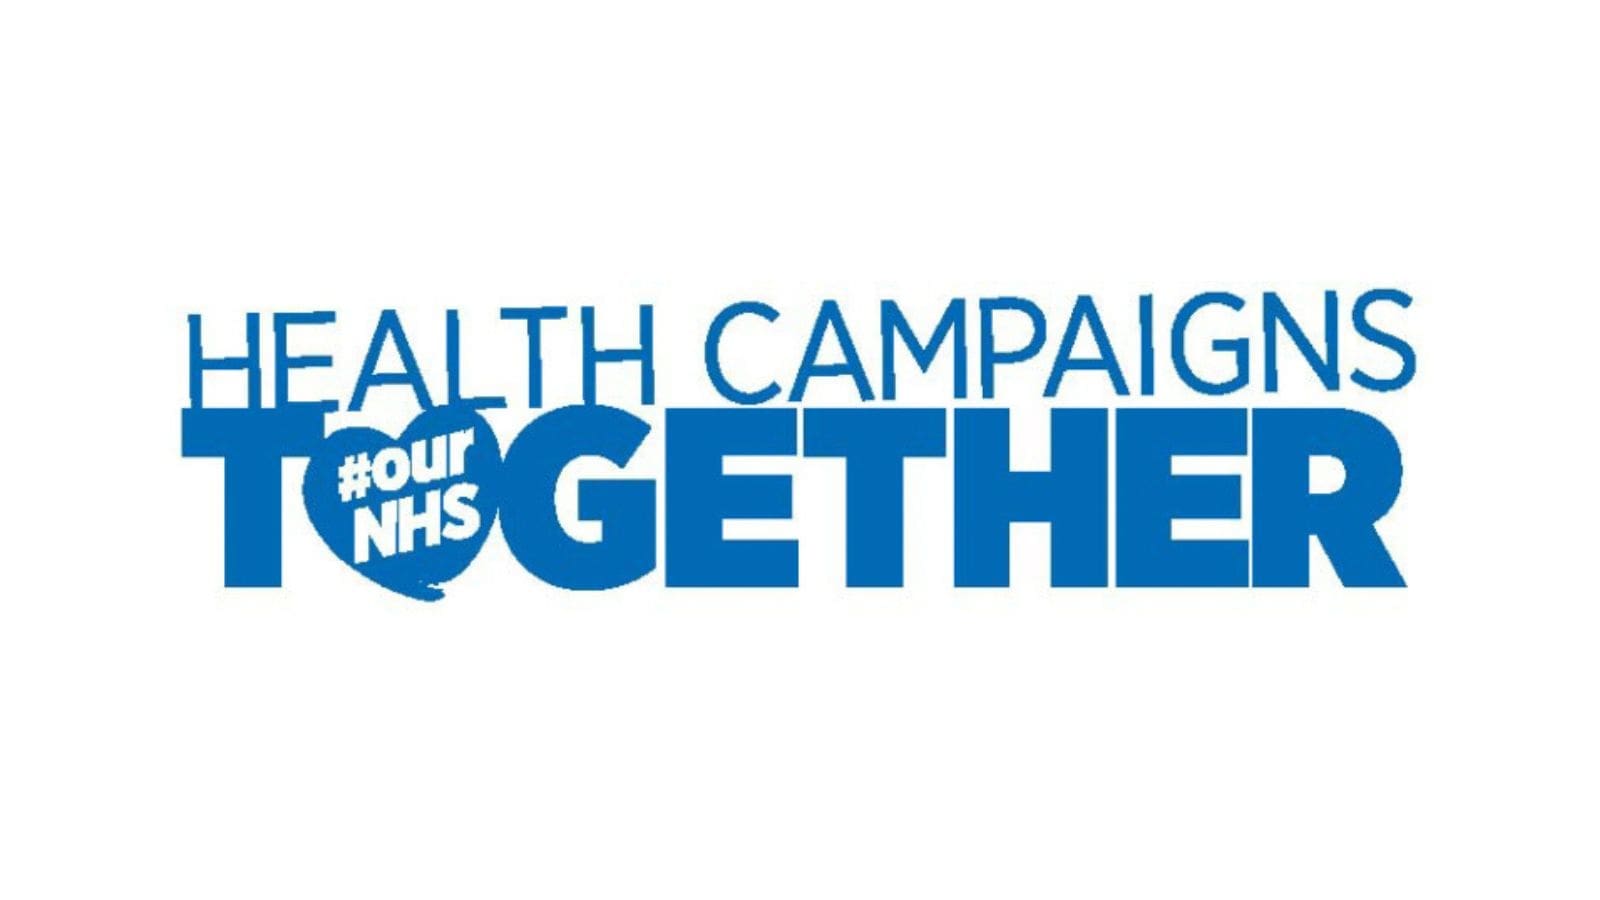 The words "HEALTH CAMPAIGNS TOGETHER" in blue. The word "TOGETHER" is in bold and the first "O" is a heart with the words "#ourNHS" in.